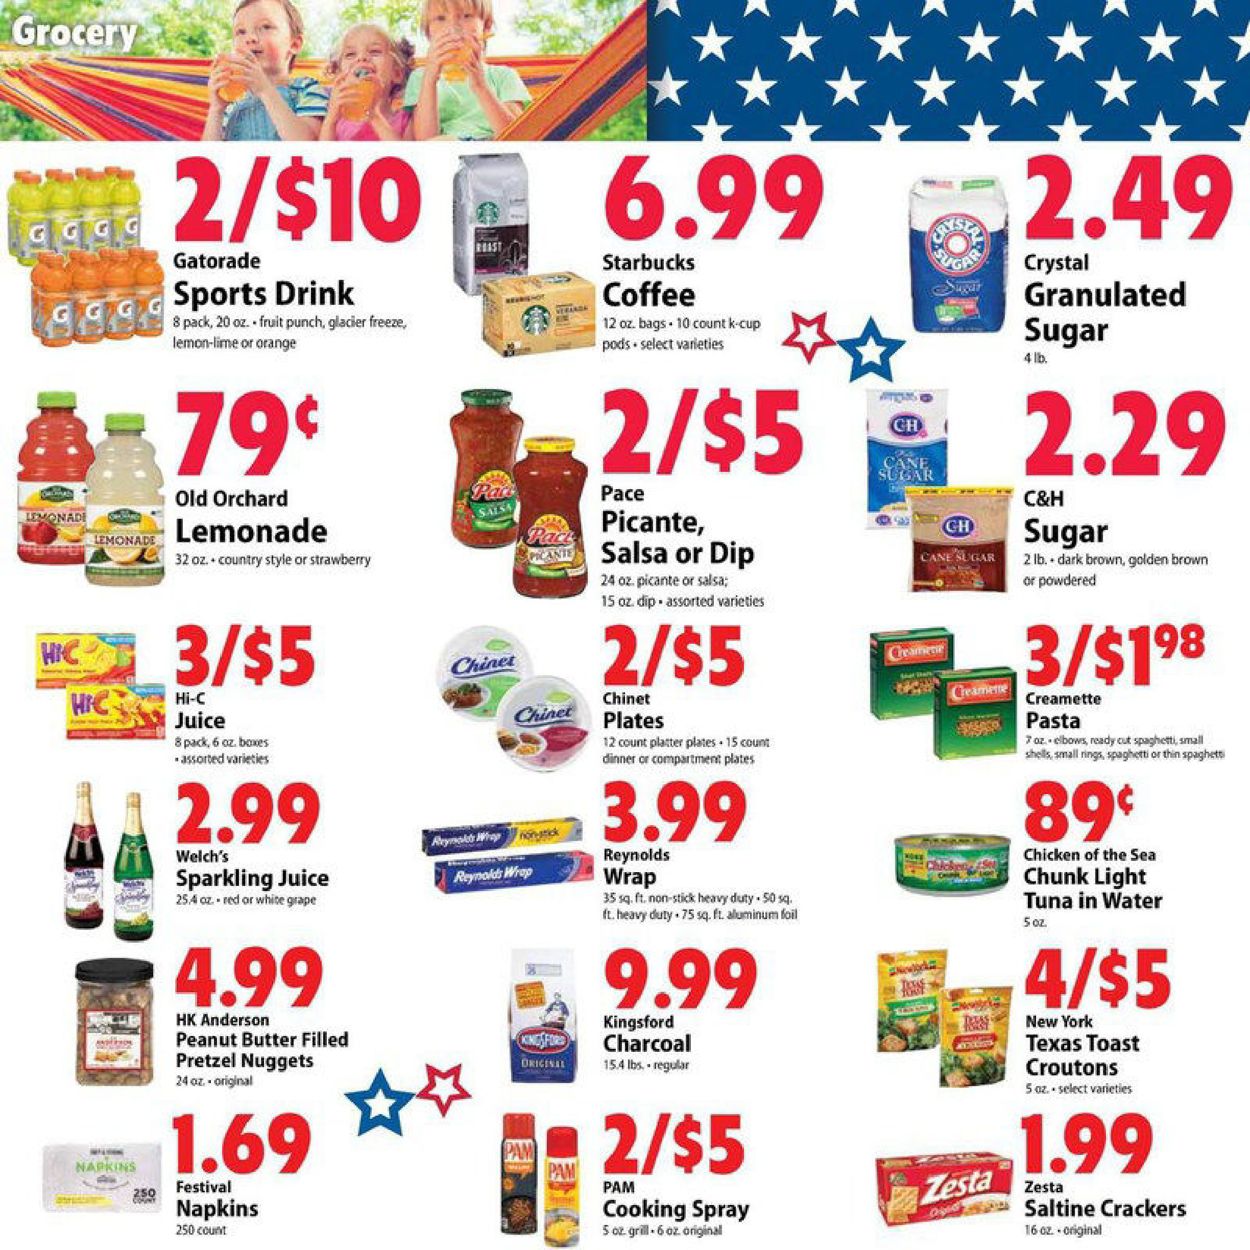 Festival Foods Current weekly ad 05/22 - 05/28/2019 [9] - frequent-ads.com